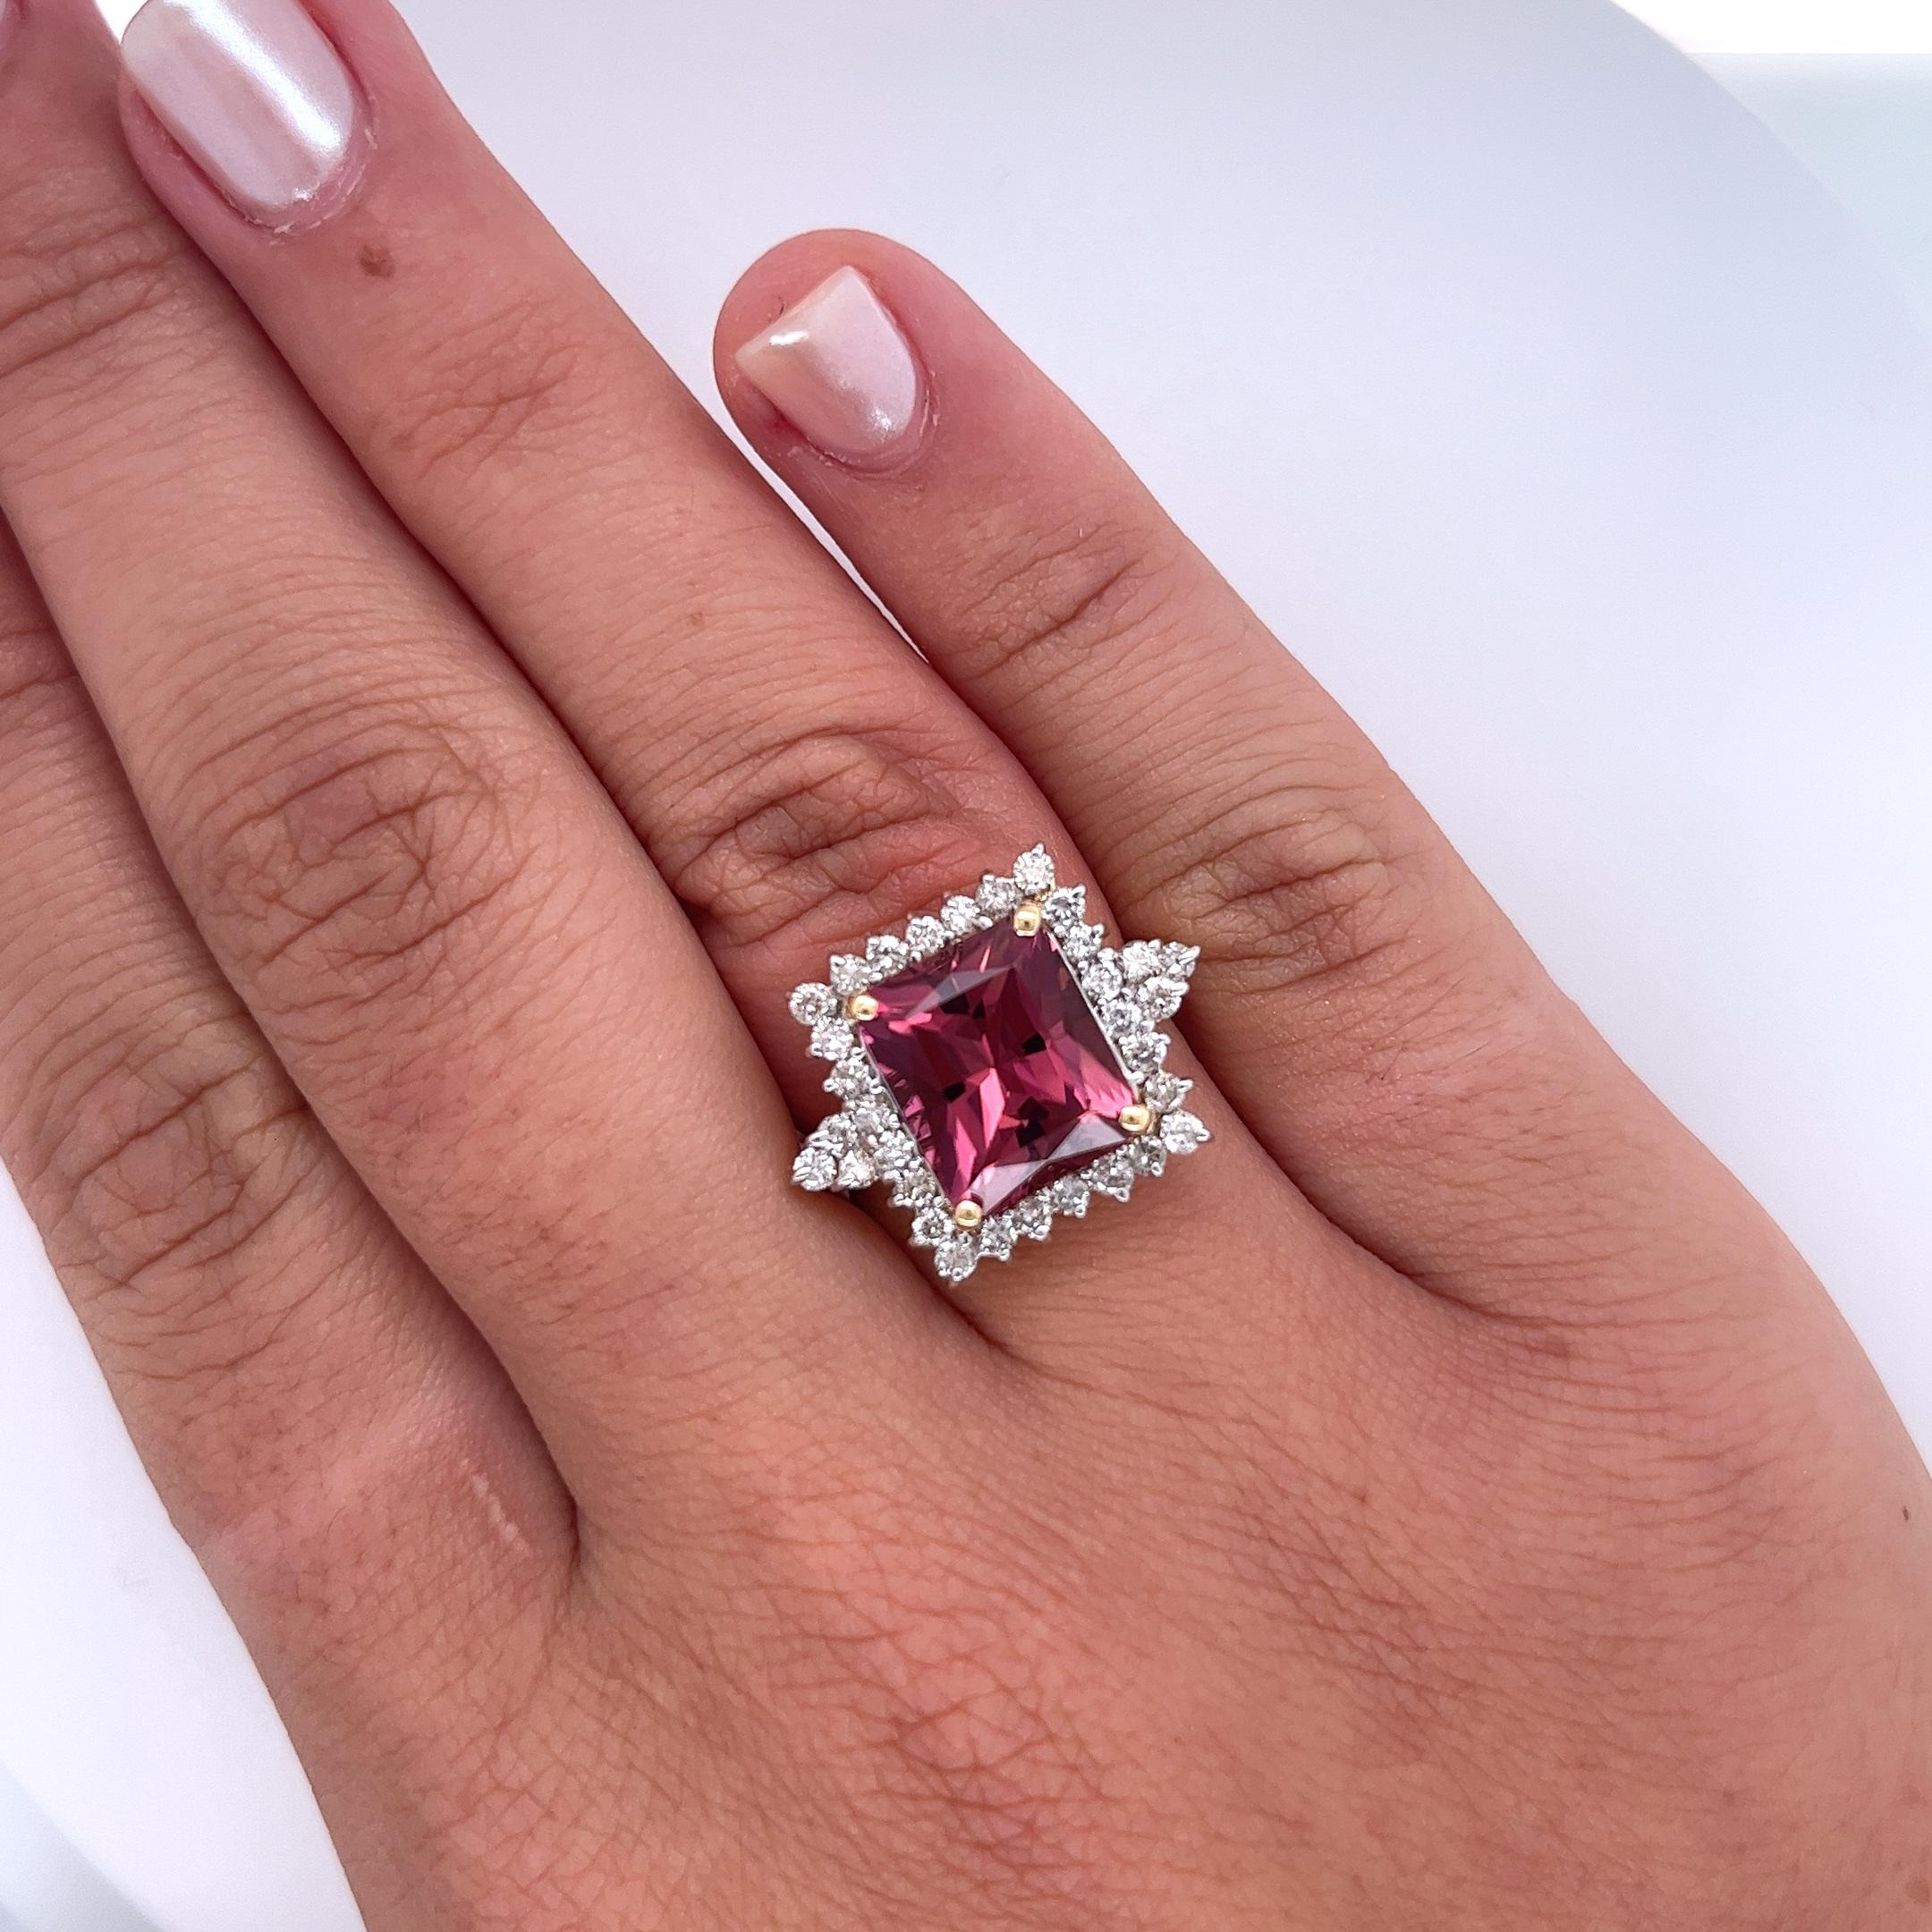 Vintage 7 Carat Pink Tourmaline and 1 Carat Diamond Ring. Centering a richly saturated vivid pink radiant cut tourmaline of excellent color and clarity. Adorned with a round cut diamond halo of eye-clean clarity. The shank thins out as it reaches